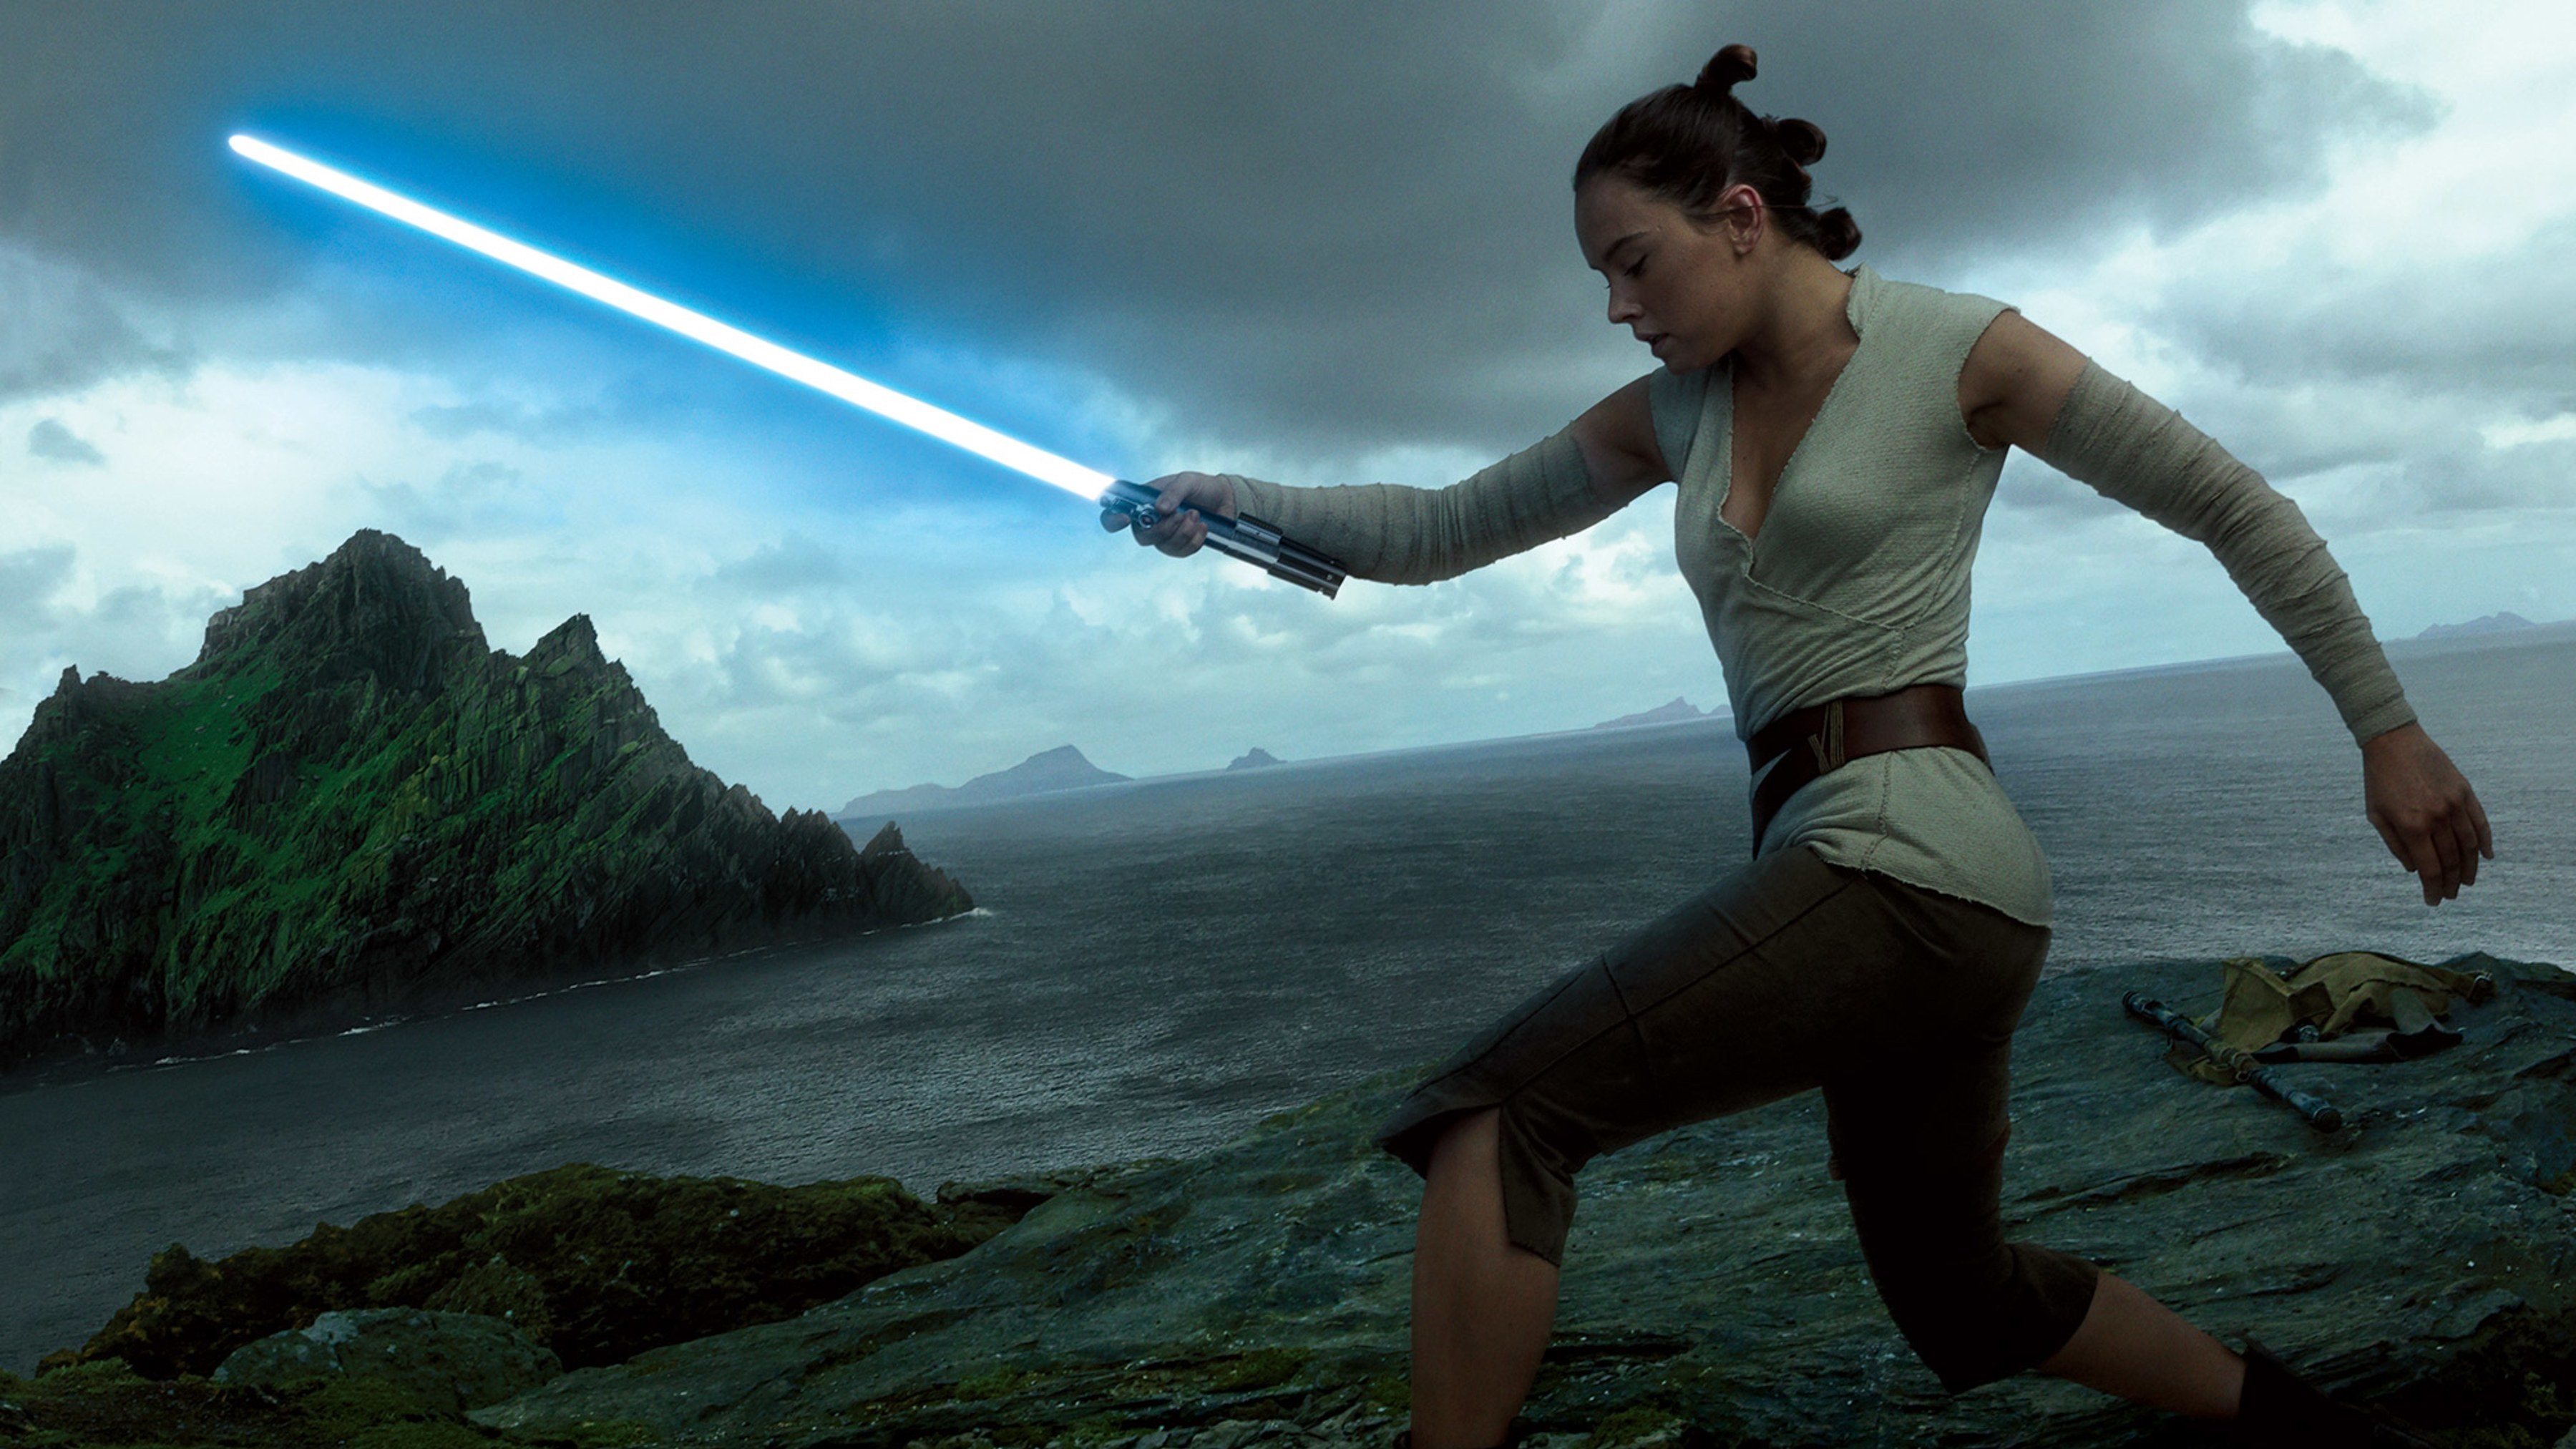 19x Rey Star Wars 19x Resolution Wallpaper Hd Movies 4k Wallpapers Images Photos And Background Wallpapers Den